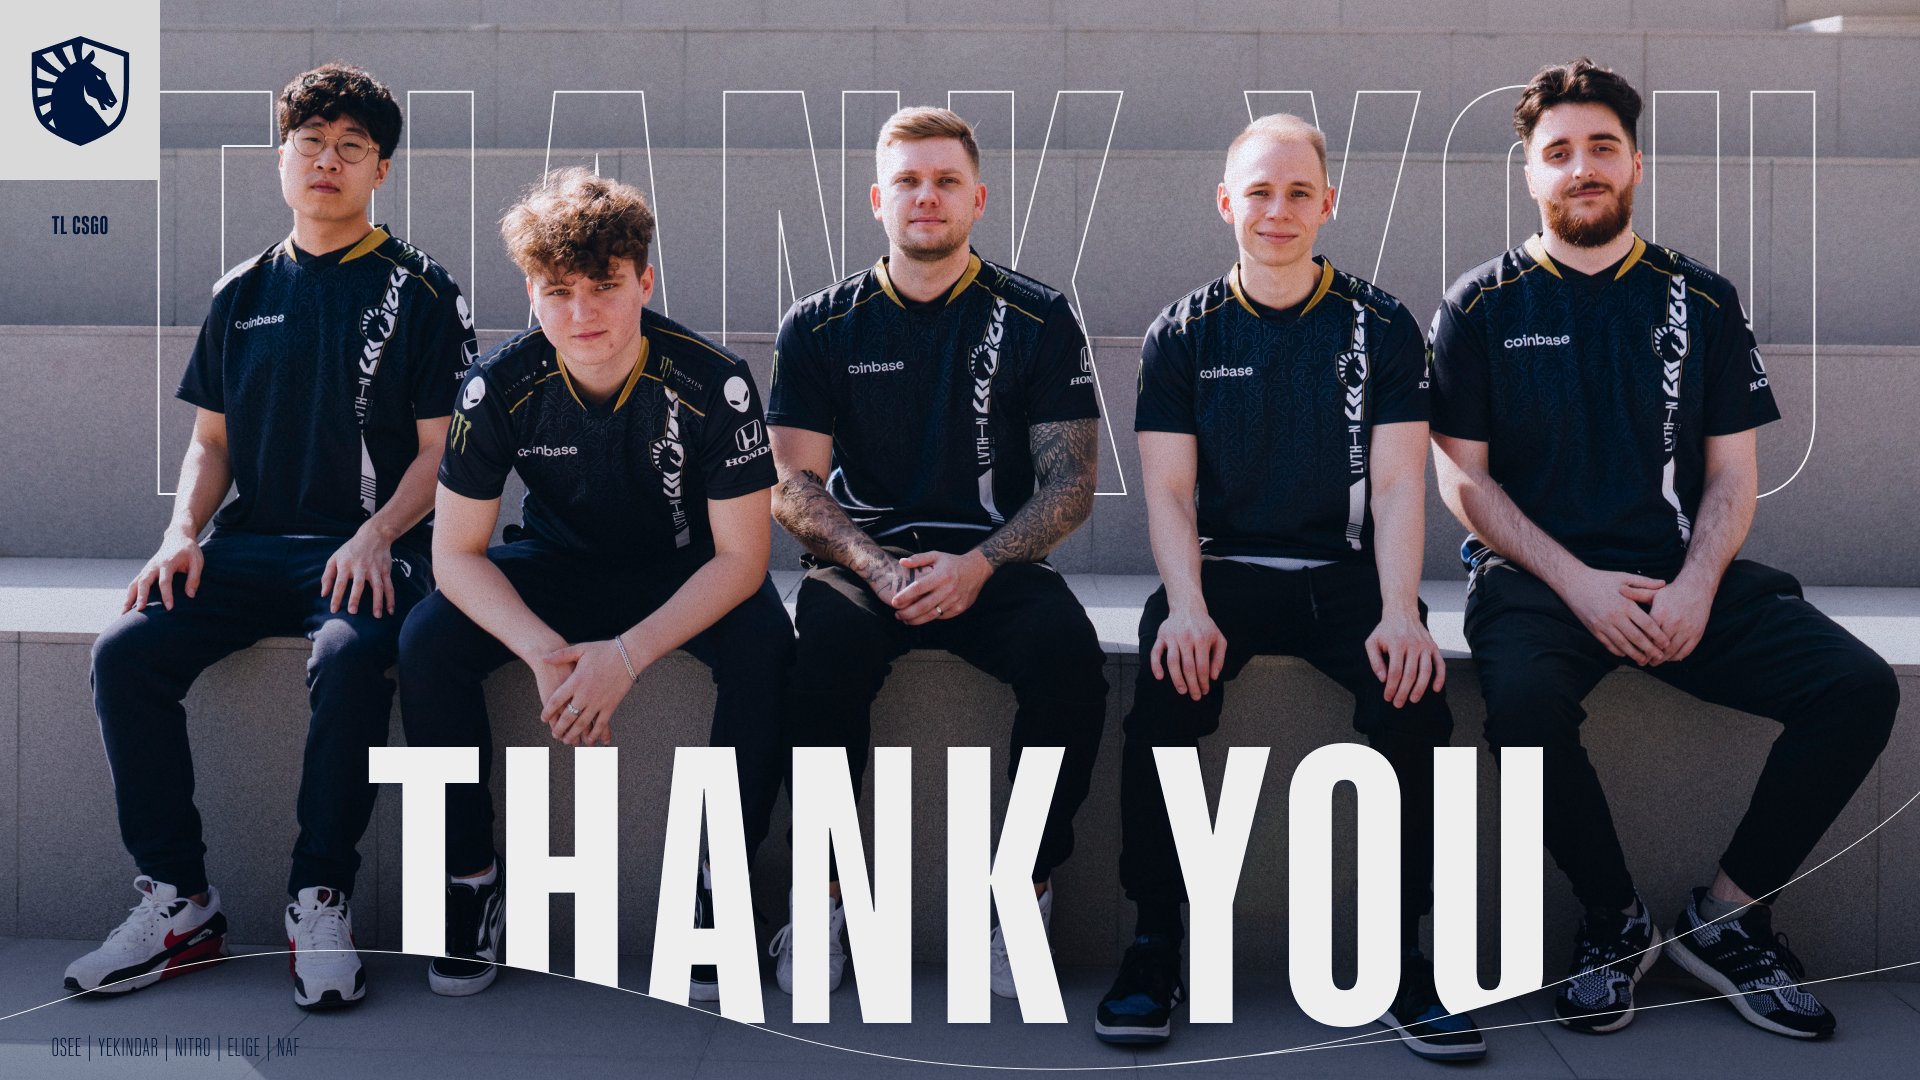 Team Liquid CS on X: We want to thank everyone for the support